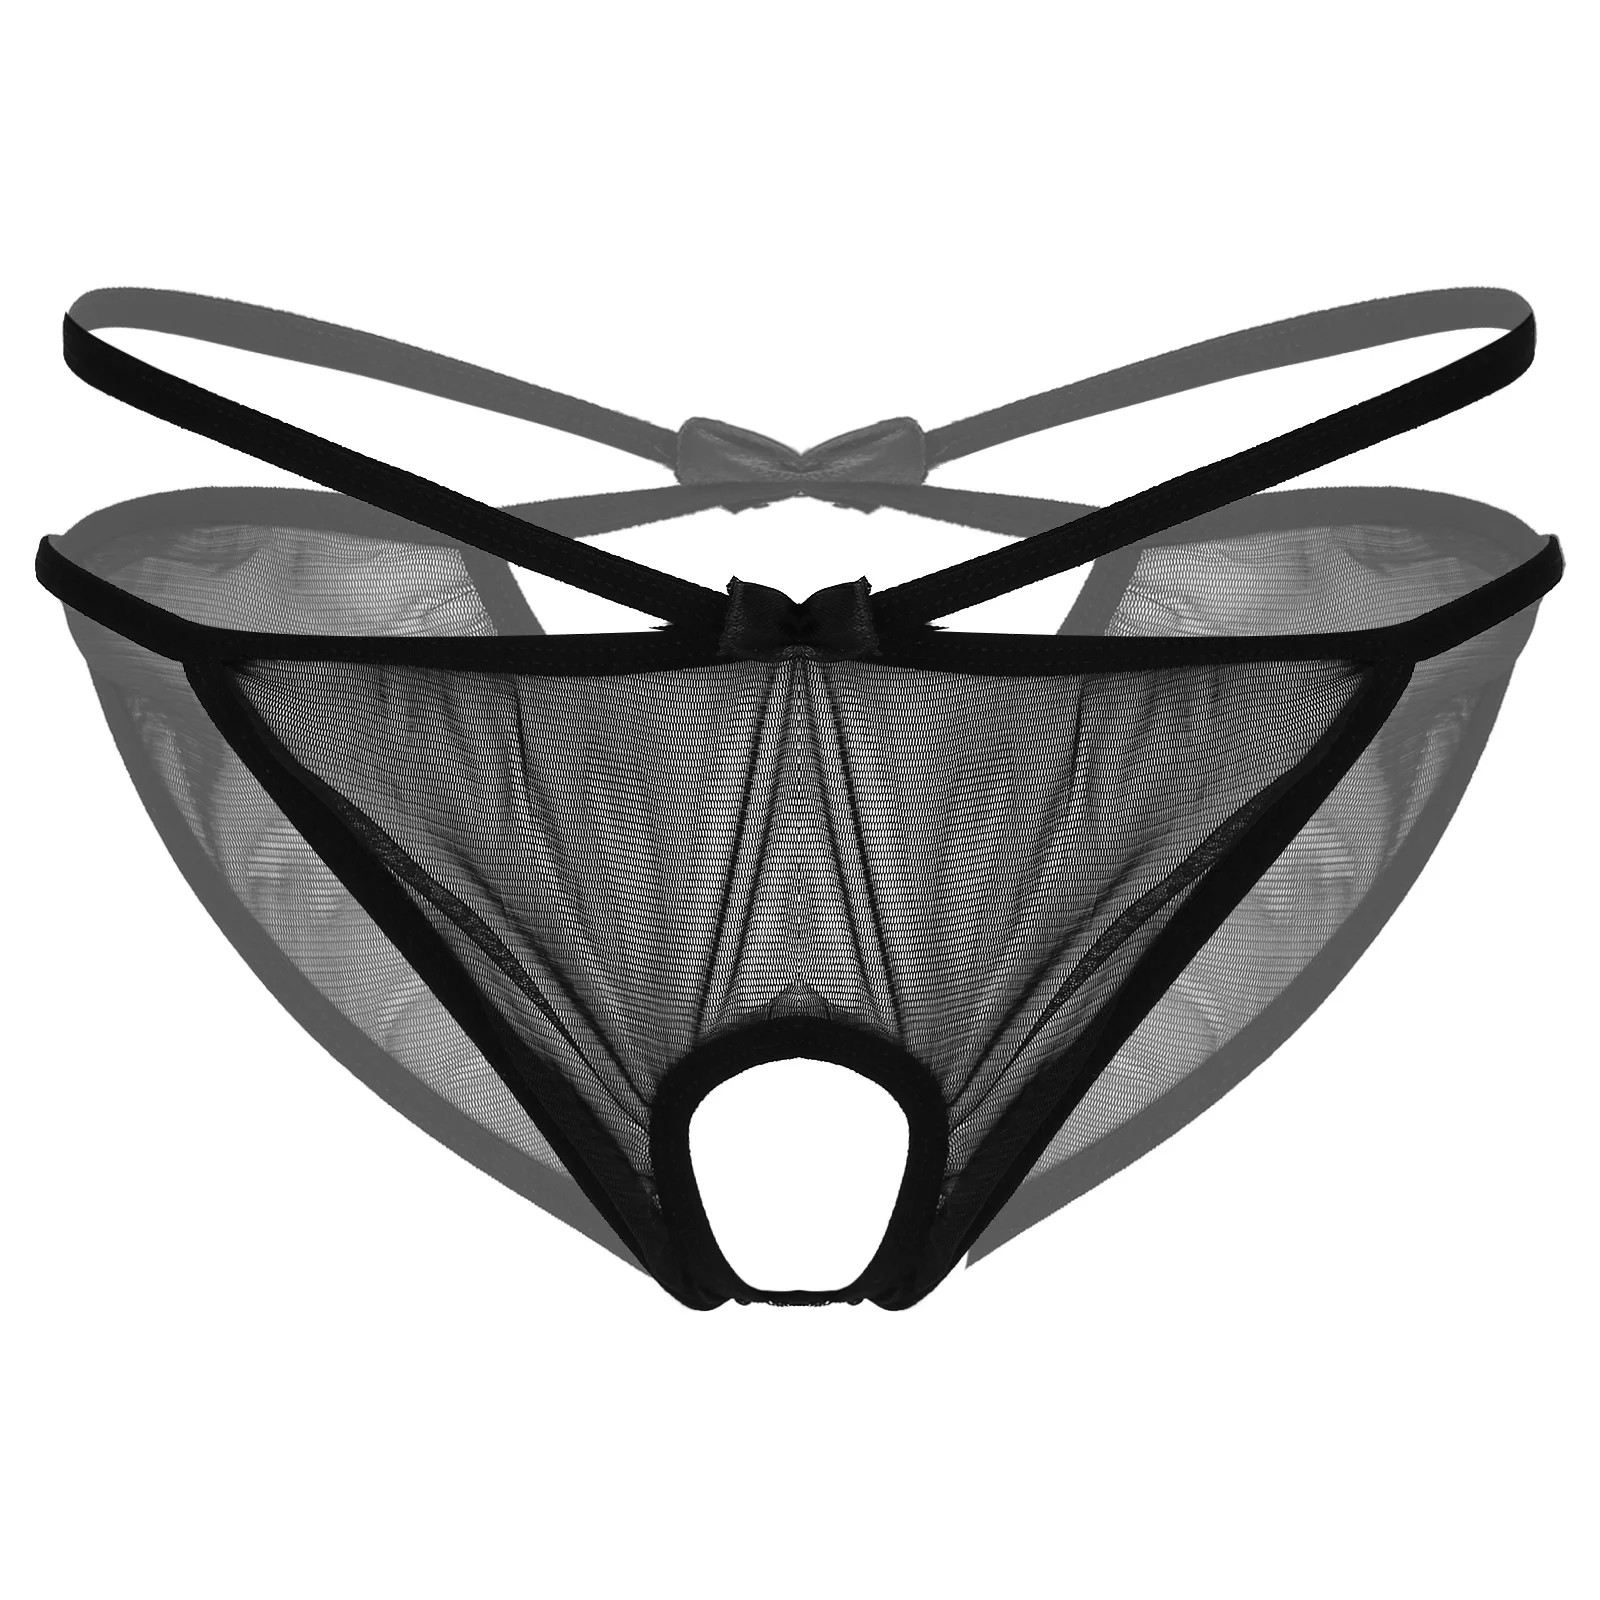 Womens Lingerie See-through Mesh Crotchless Briefs Low Waist Underpants Cut Out Back Bowknot Panties Elastic Waistband Underwear